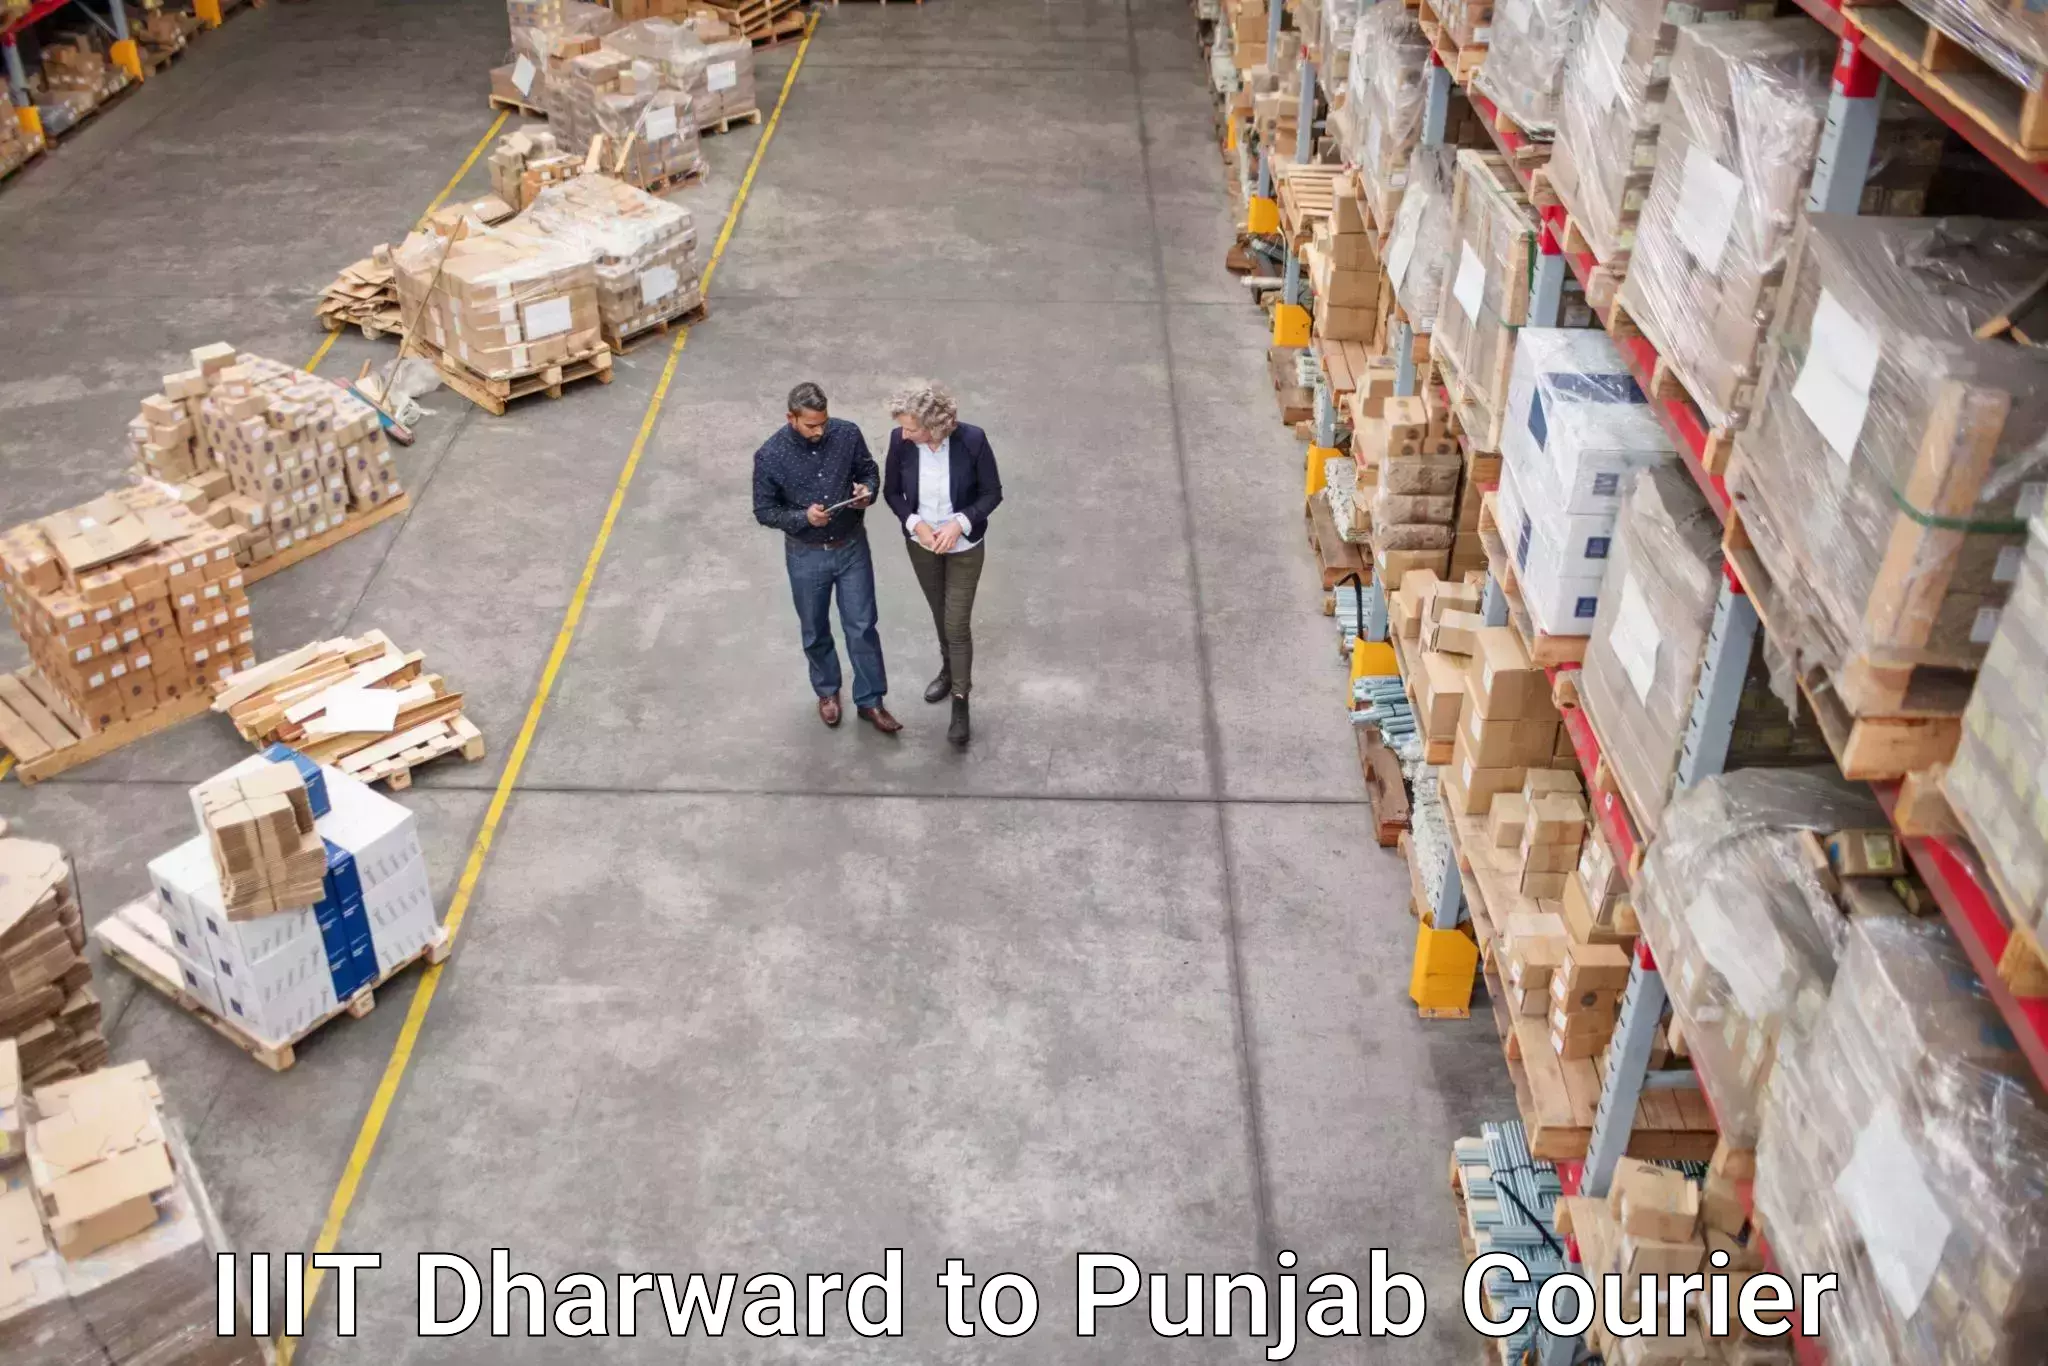 Local delivery service IIIT Dharward to Punjab